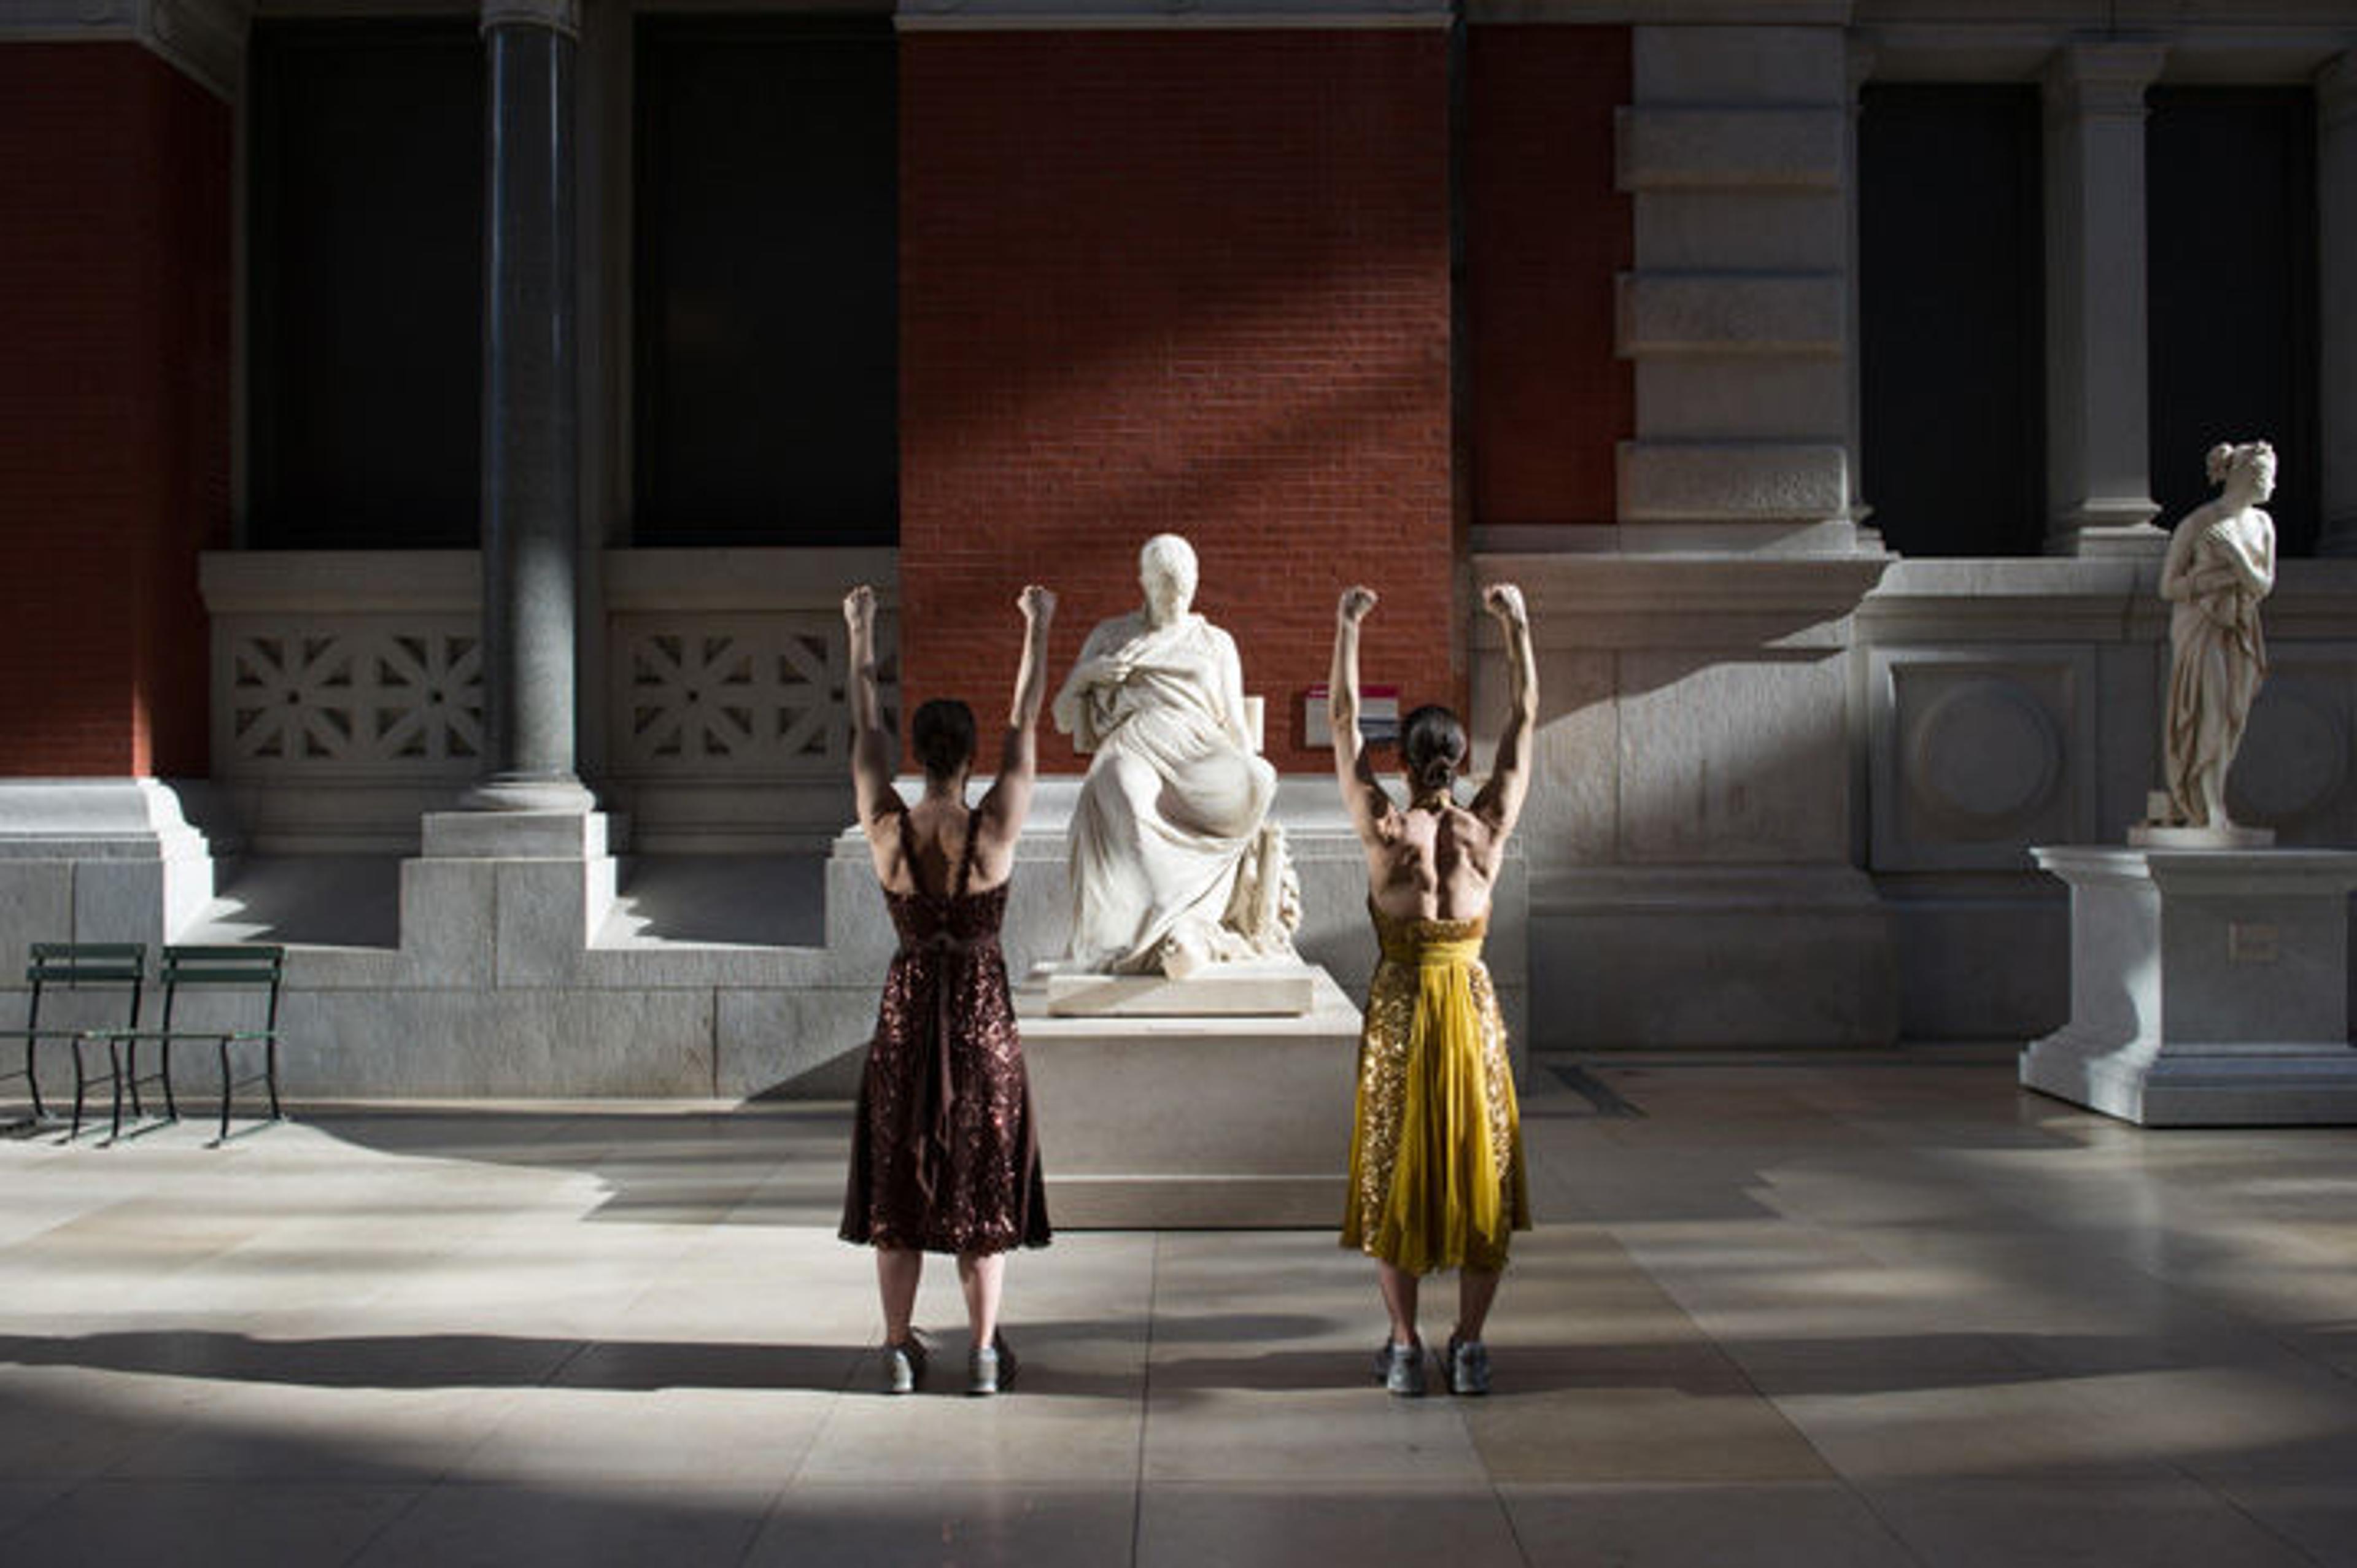 Two women stretch in The Met's European sculpture court while bathed in early morning light